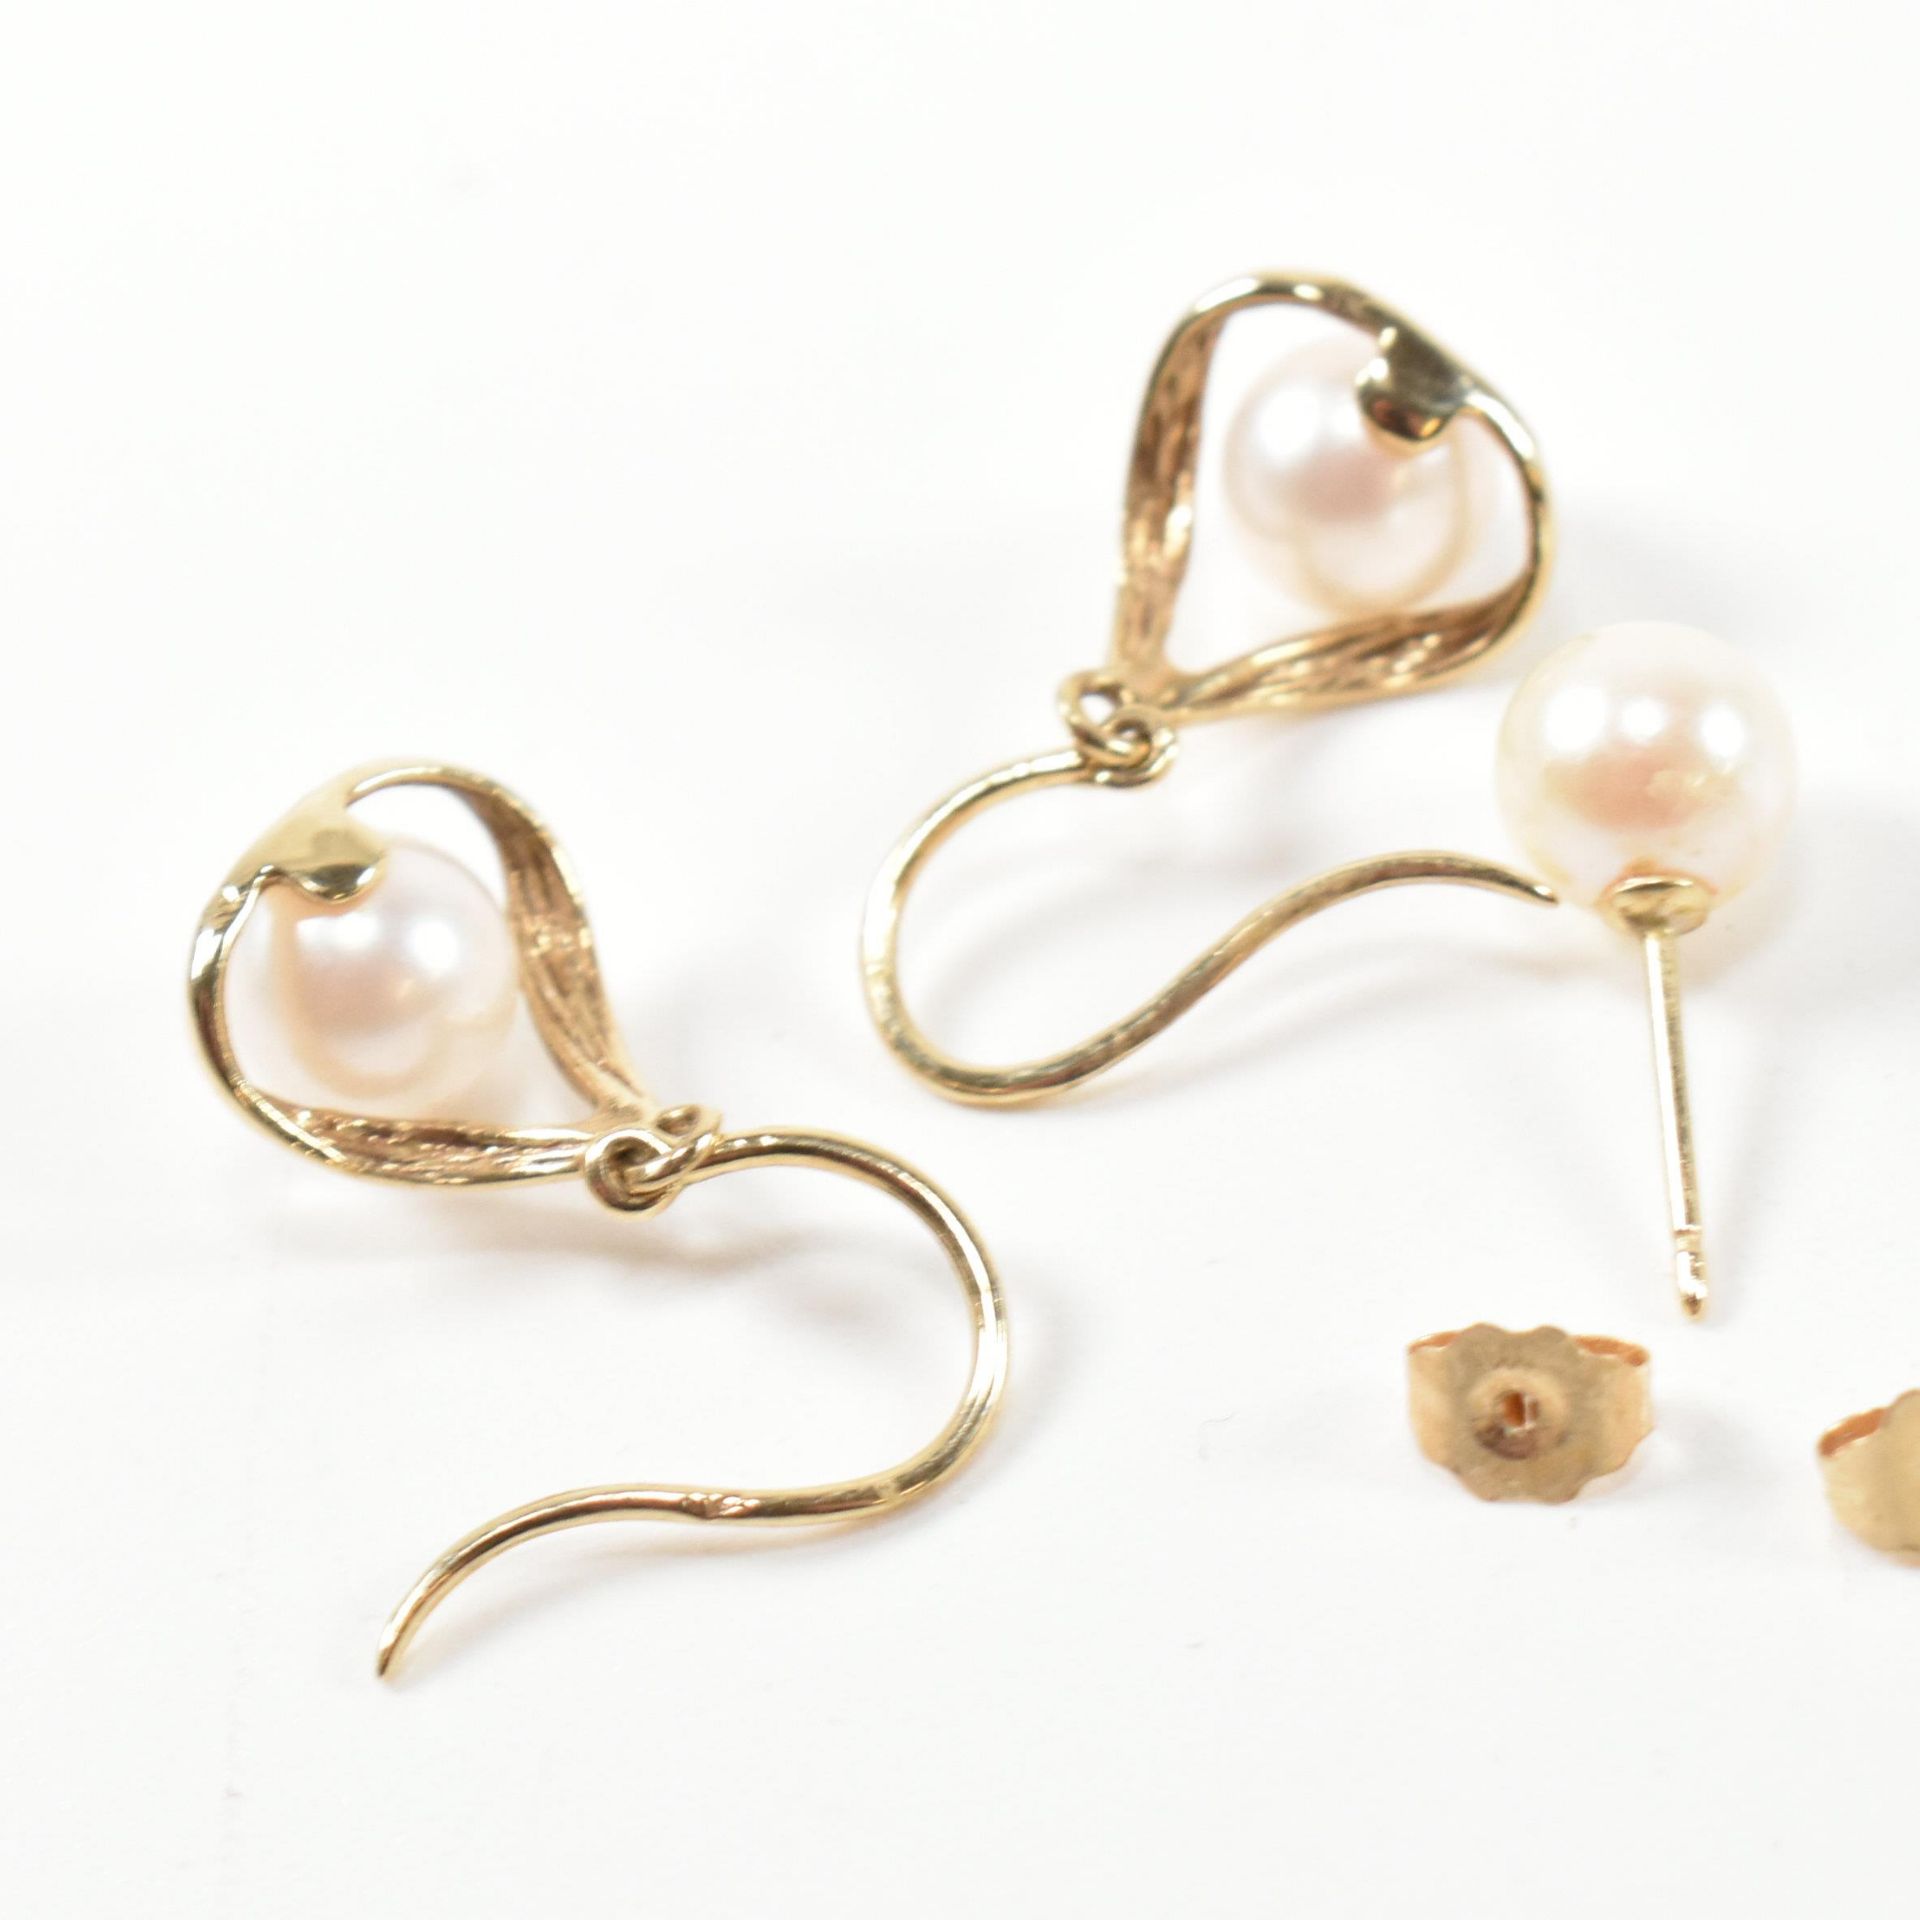 TWO PAIRS OF GOLD & CULTURED PEARL EARRINGS - Image 6 of 6